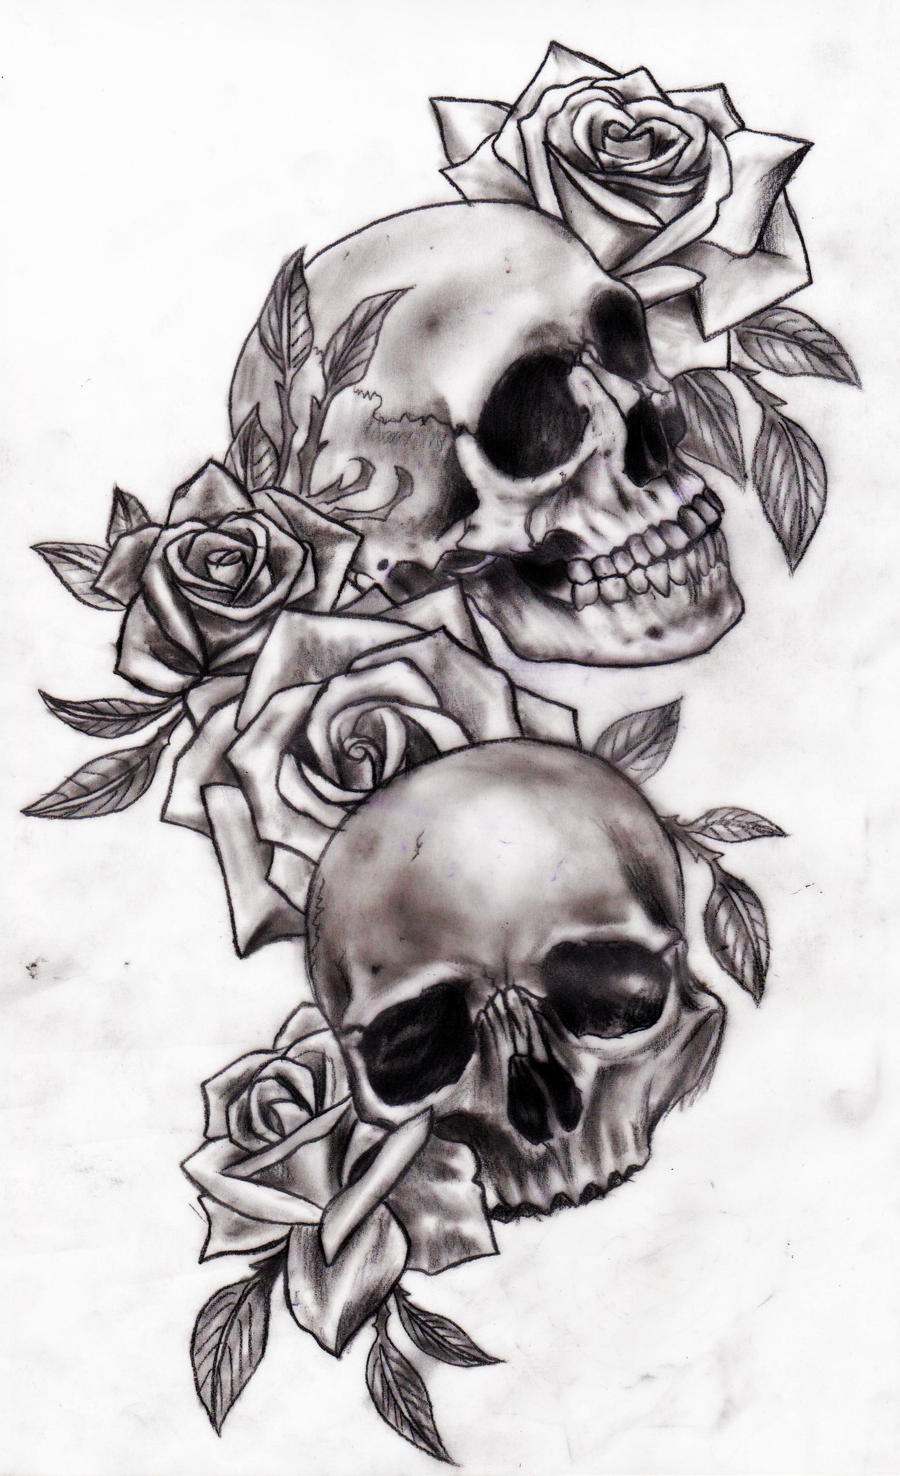 Skull and roses by CalebSlabzzzGraham on DeviantArt